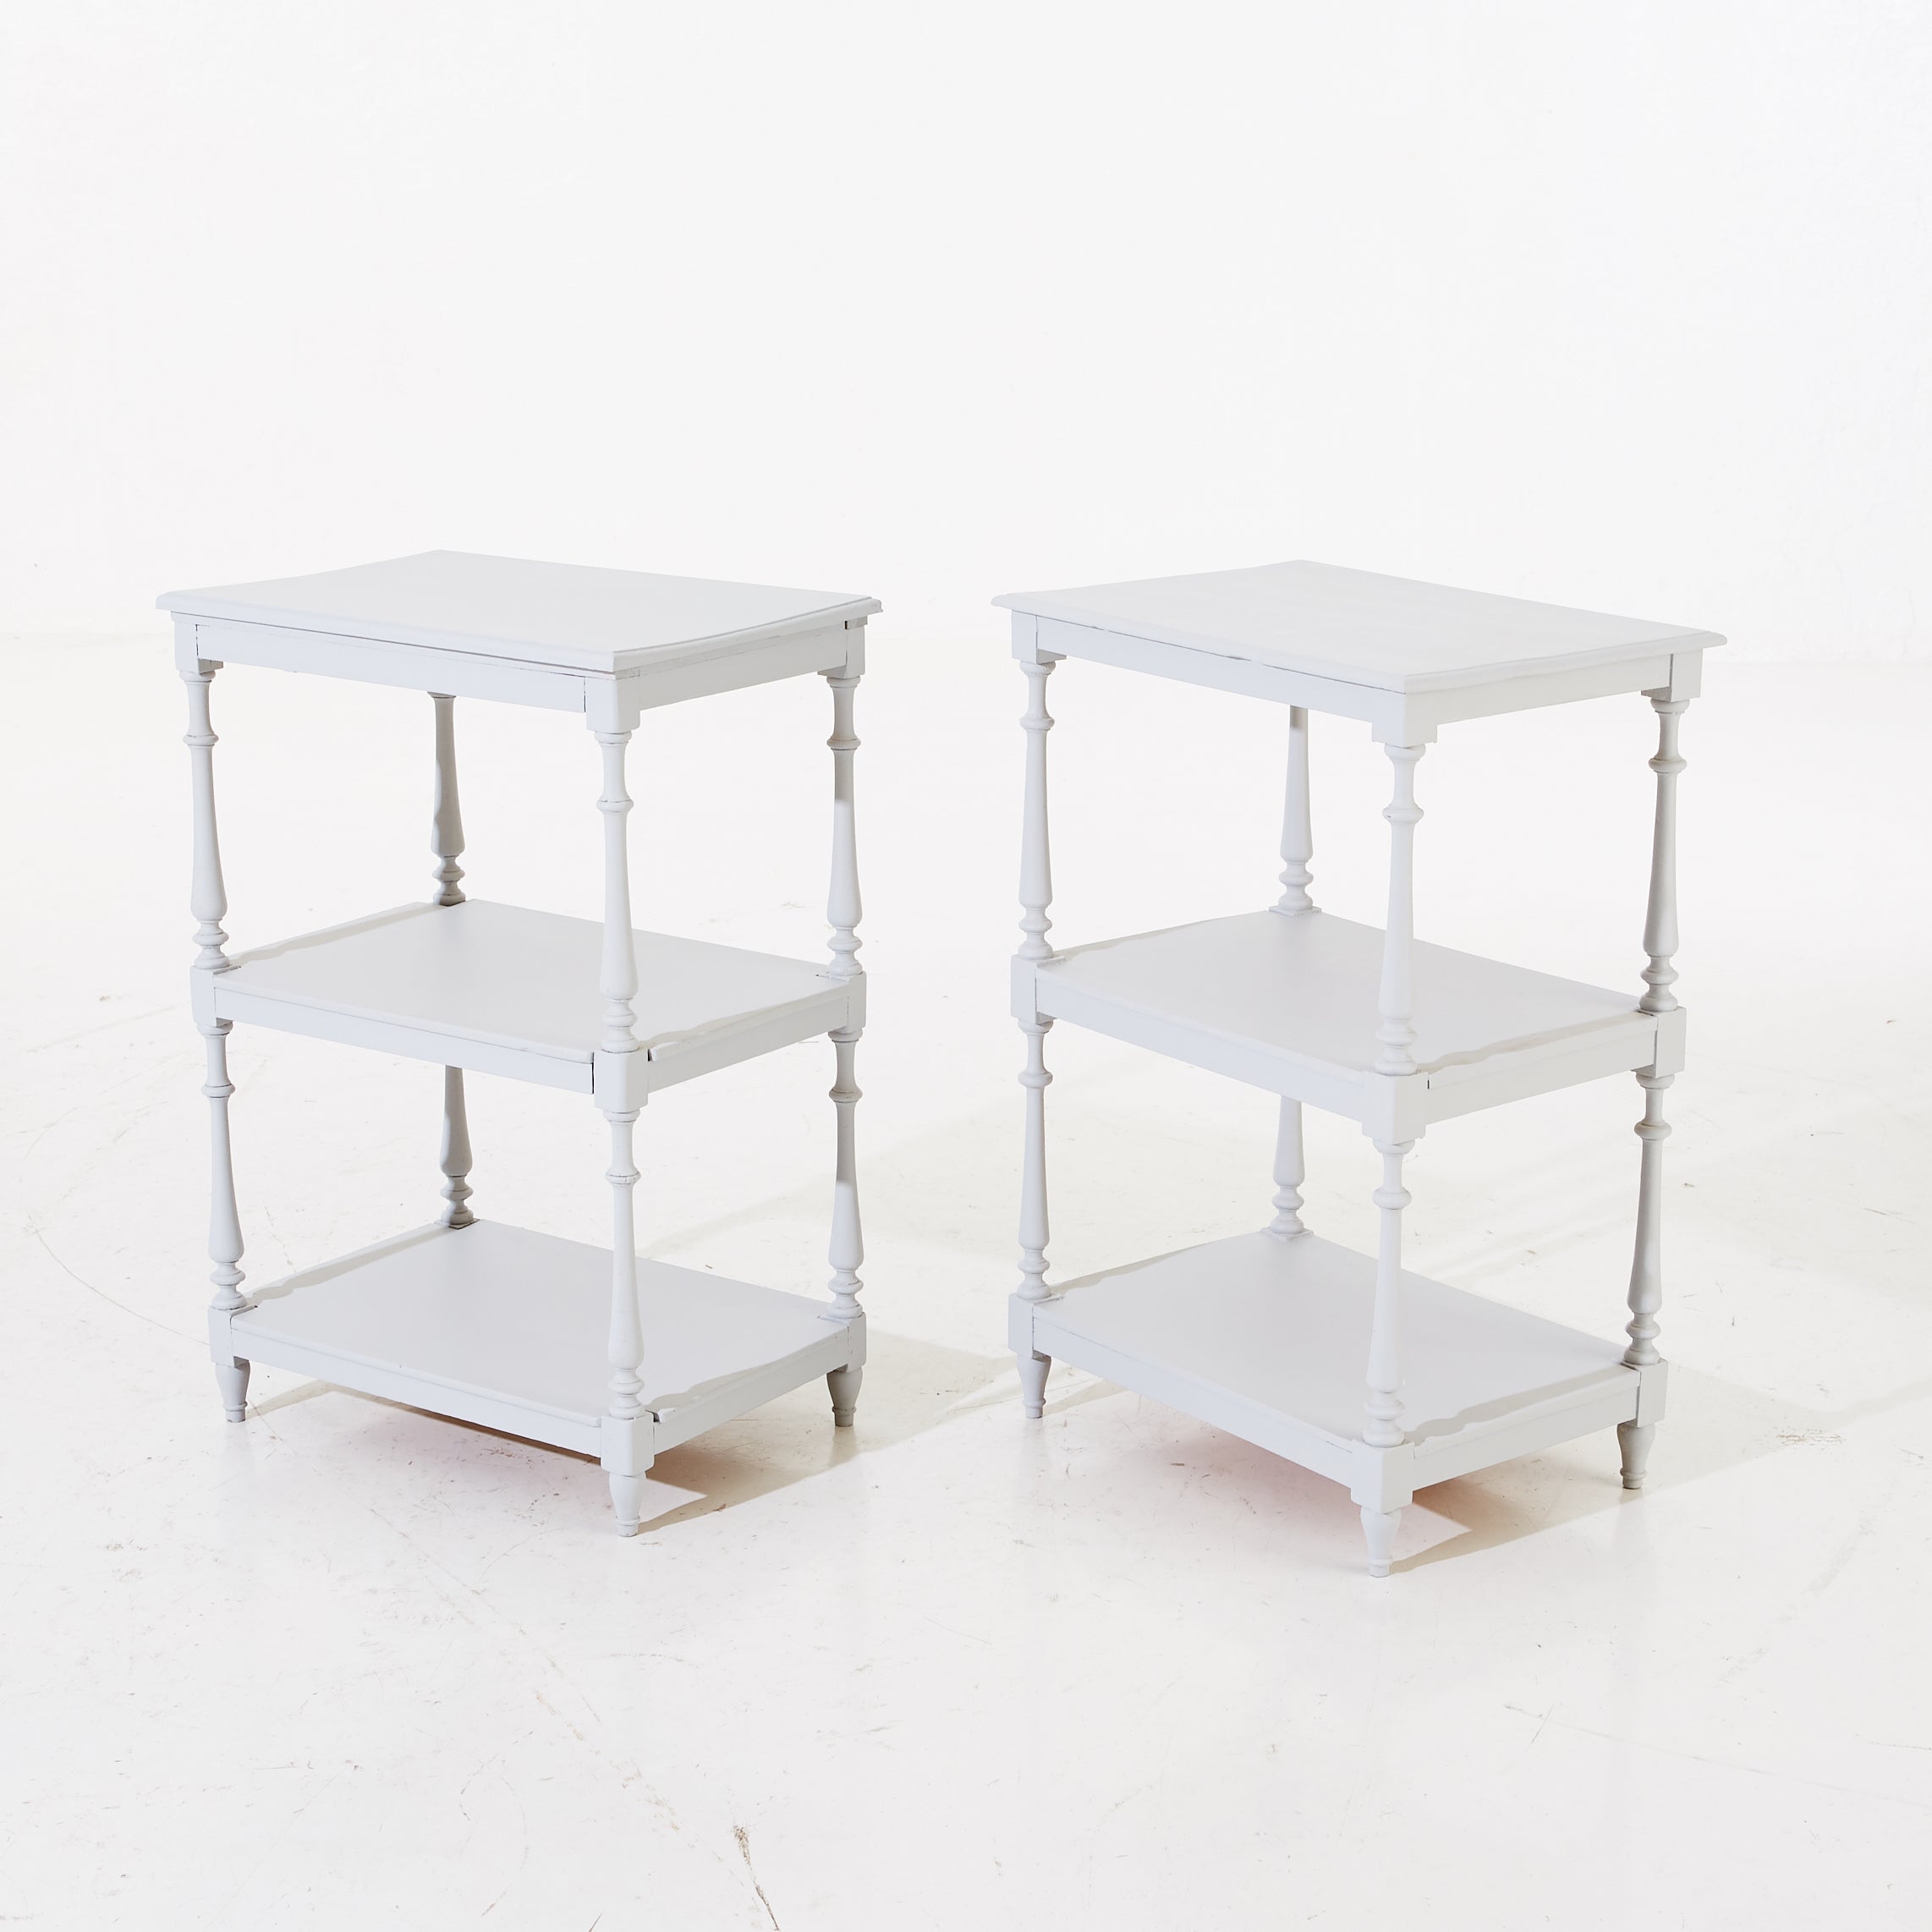 Gustavian Side Tables (1 pair)